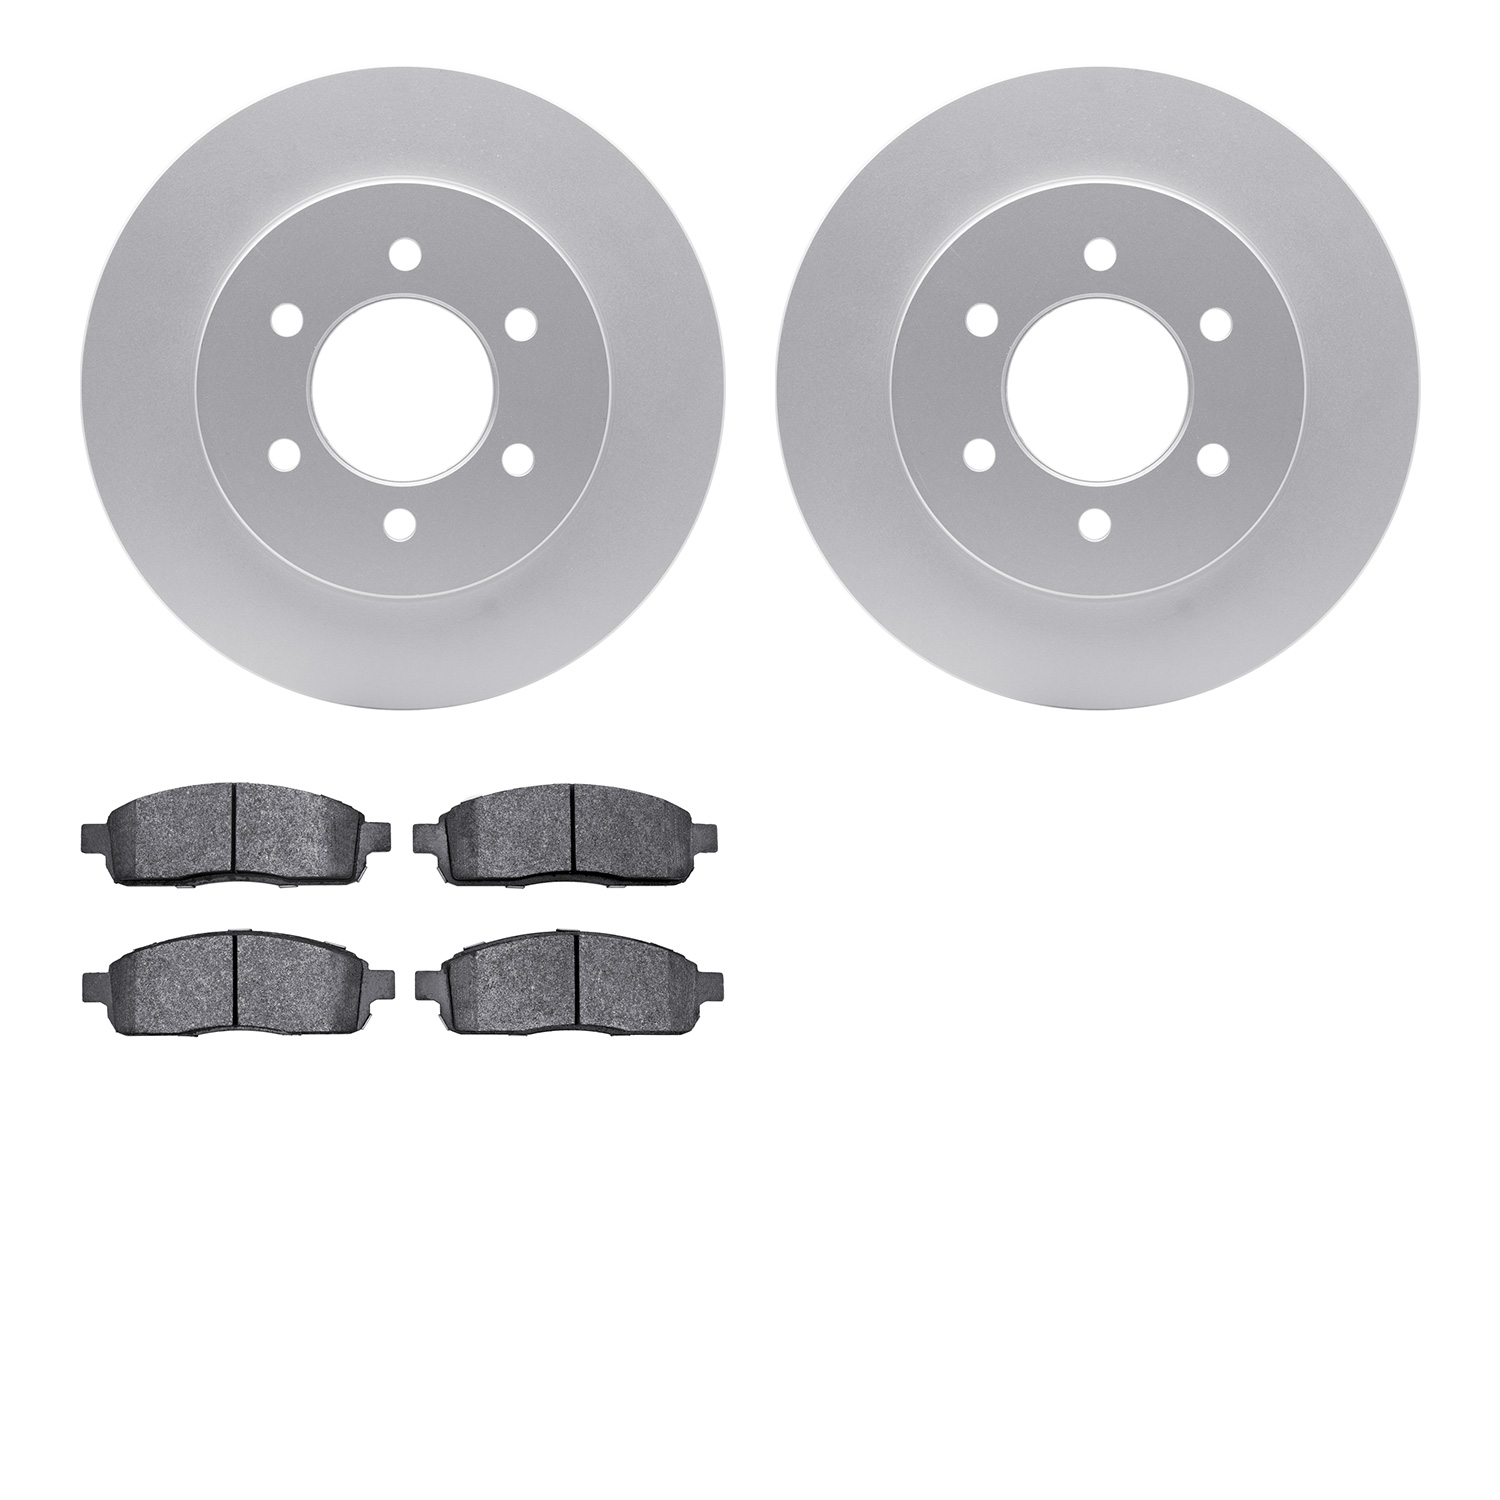 4402-54047 Geospec Brake Rotors with Ultimate-Duty Brake Pads Kit, 2004-2008 Ford/Lincoln/Mercury/Mazda, Position: Front